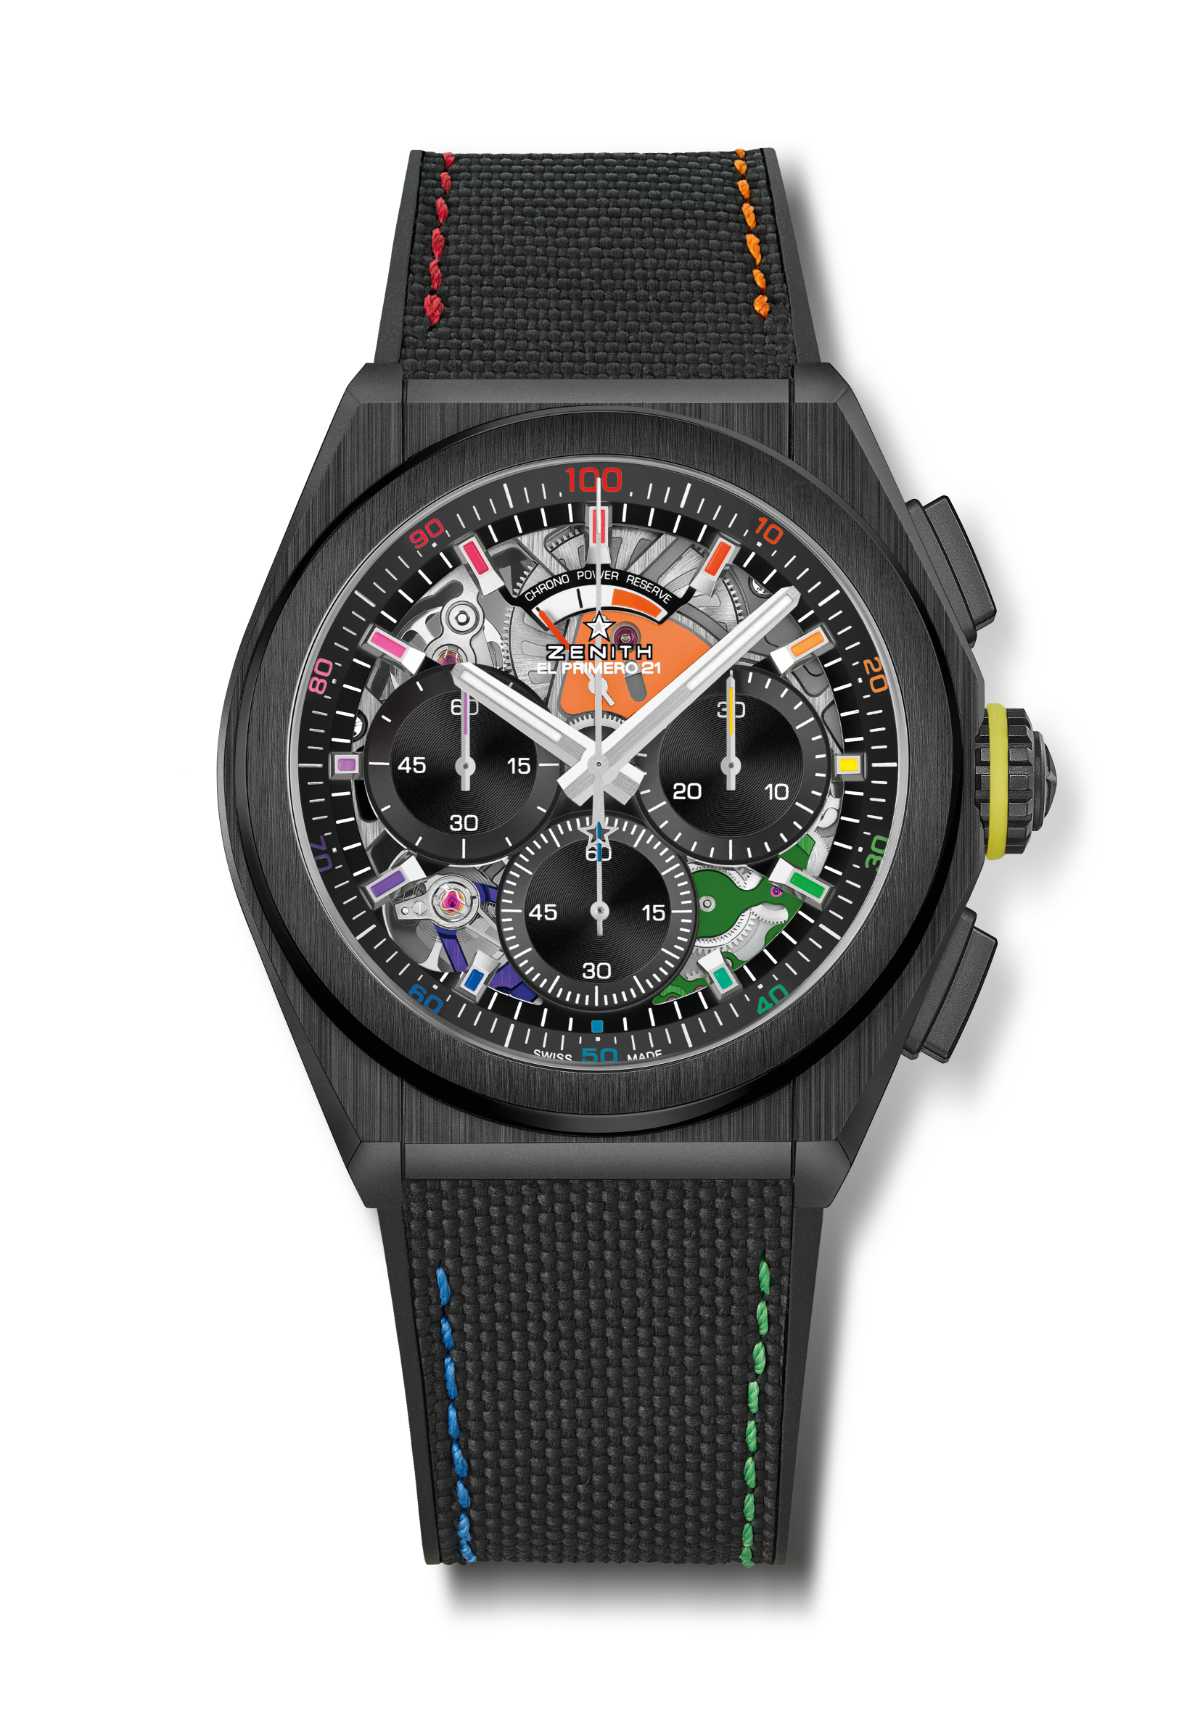 Zenith’s High-frequency Precision Returns In The Defy 21 Chroma II